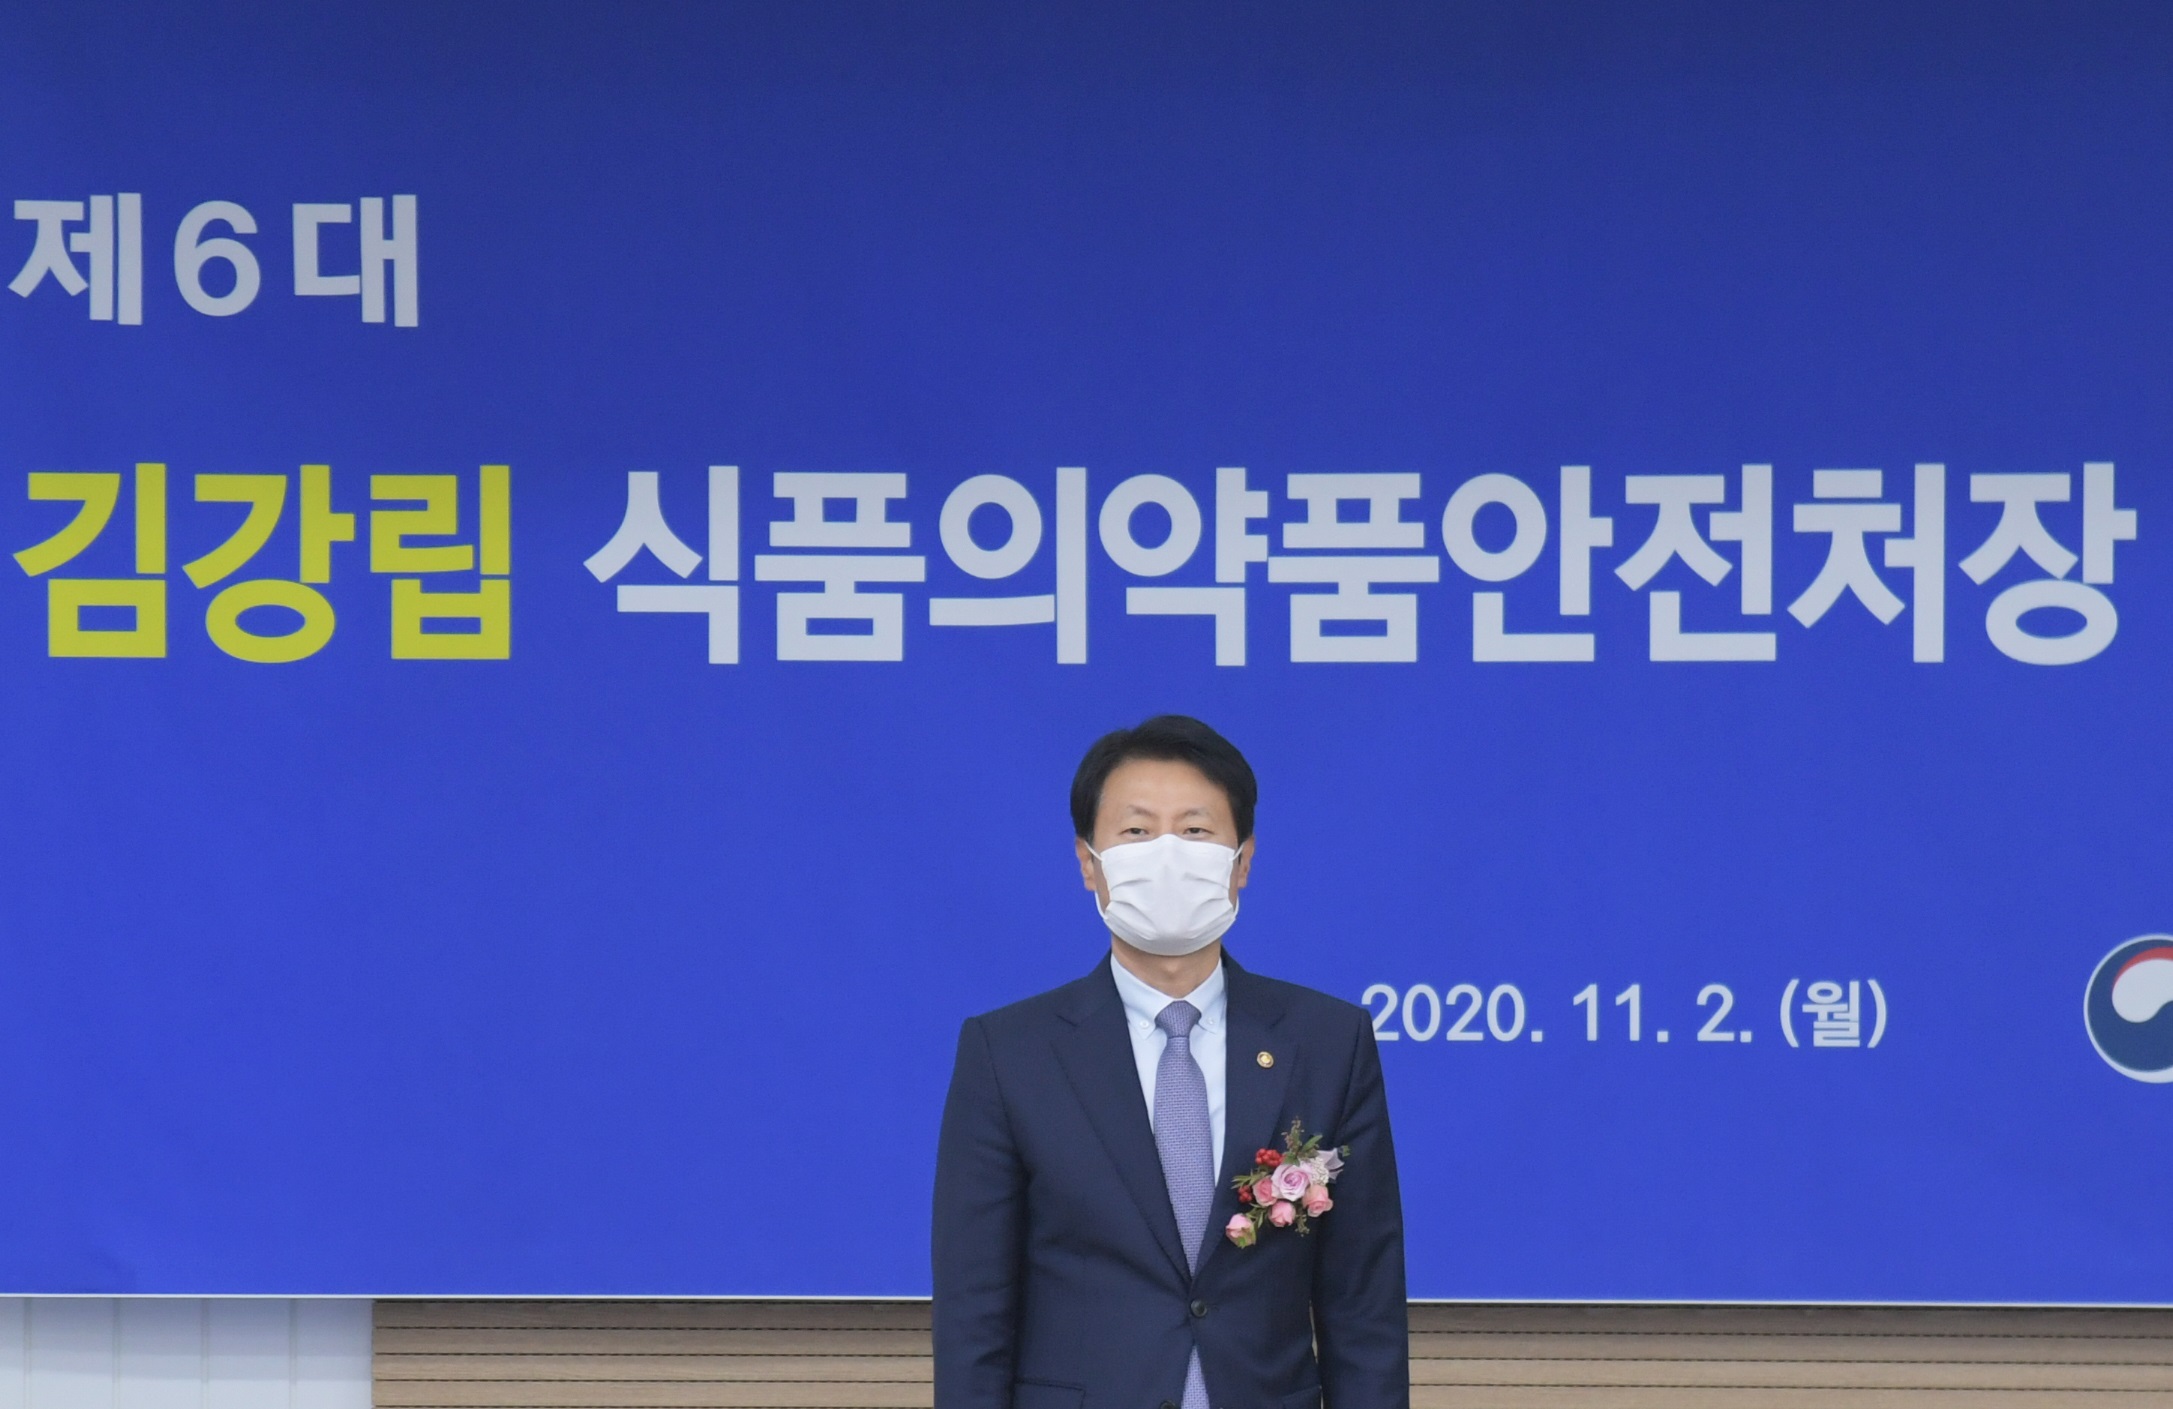 [Nov. 2, 2020] Inauguration of Minister Kim Ganglip as the 6th Minister of Food and Drug Safety